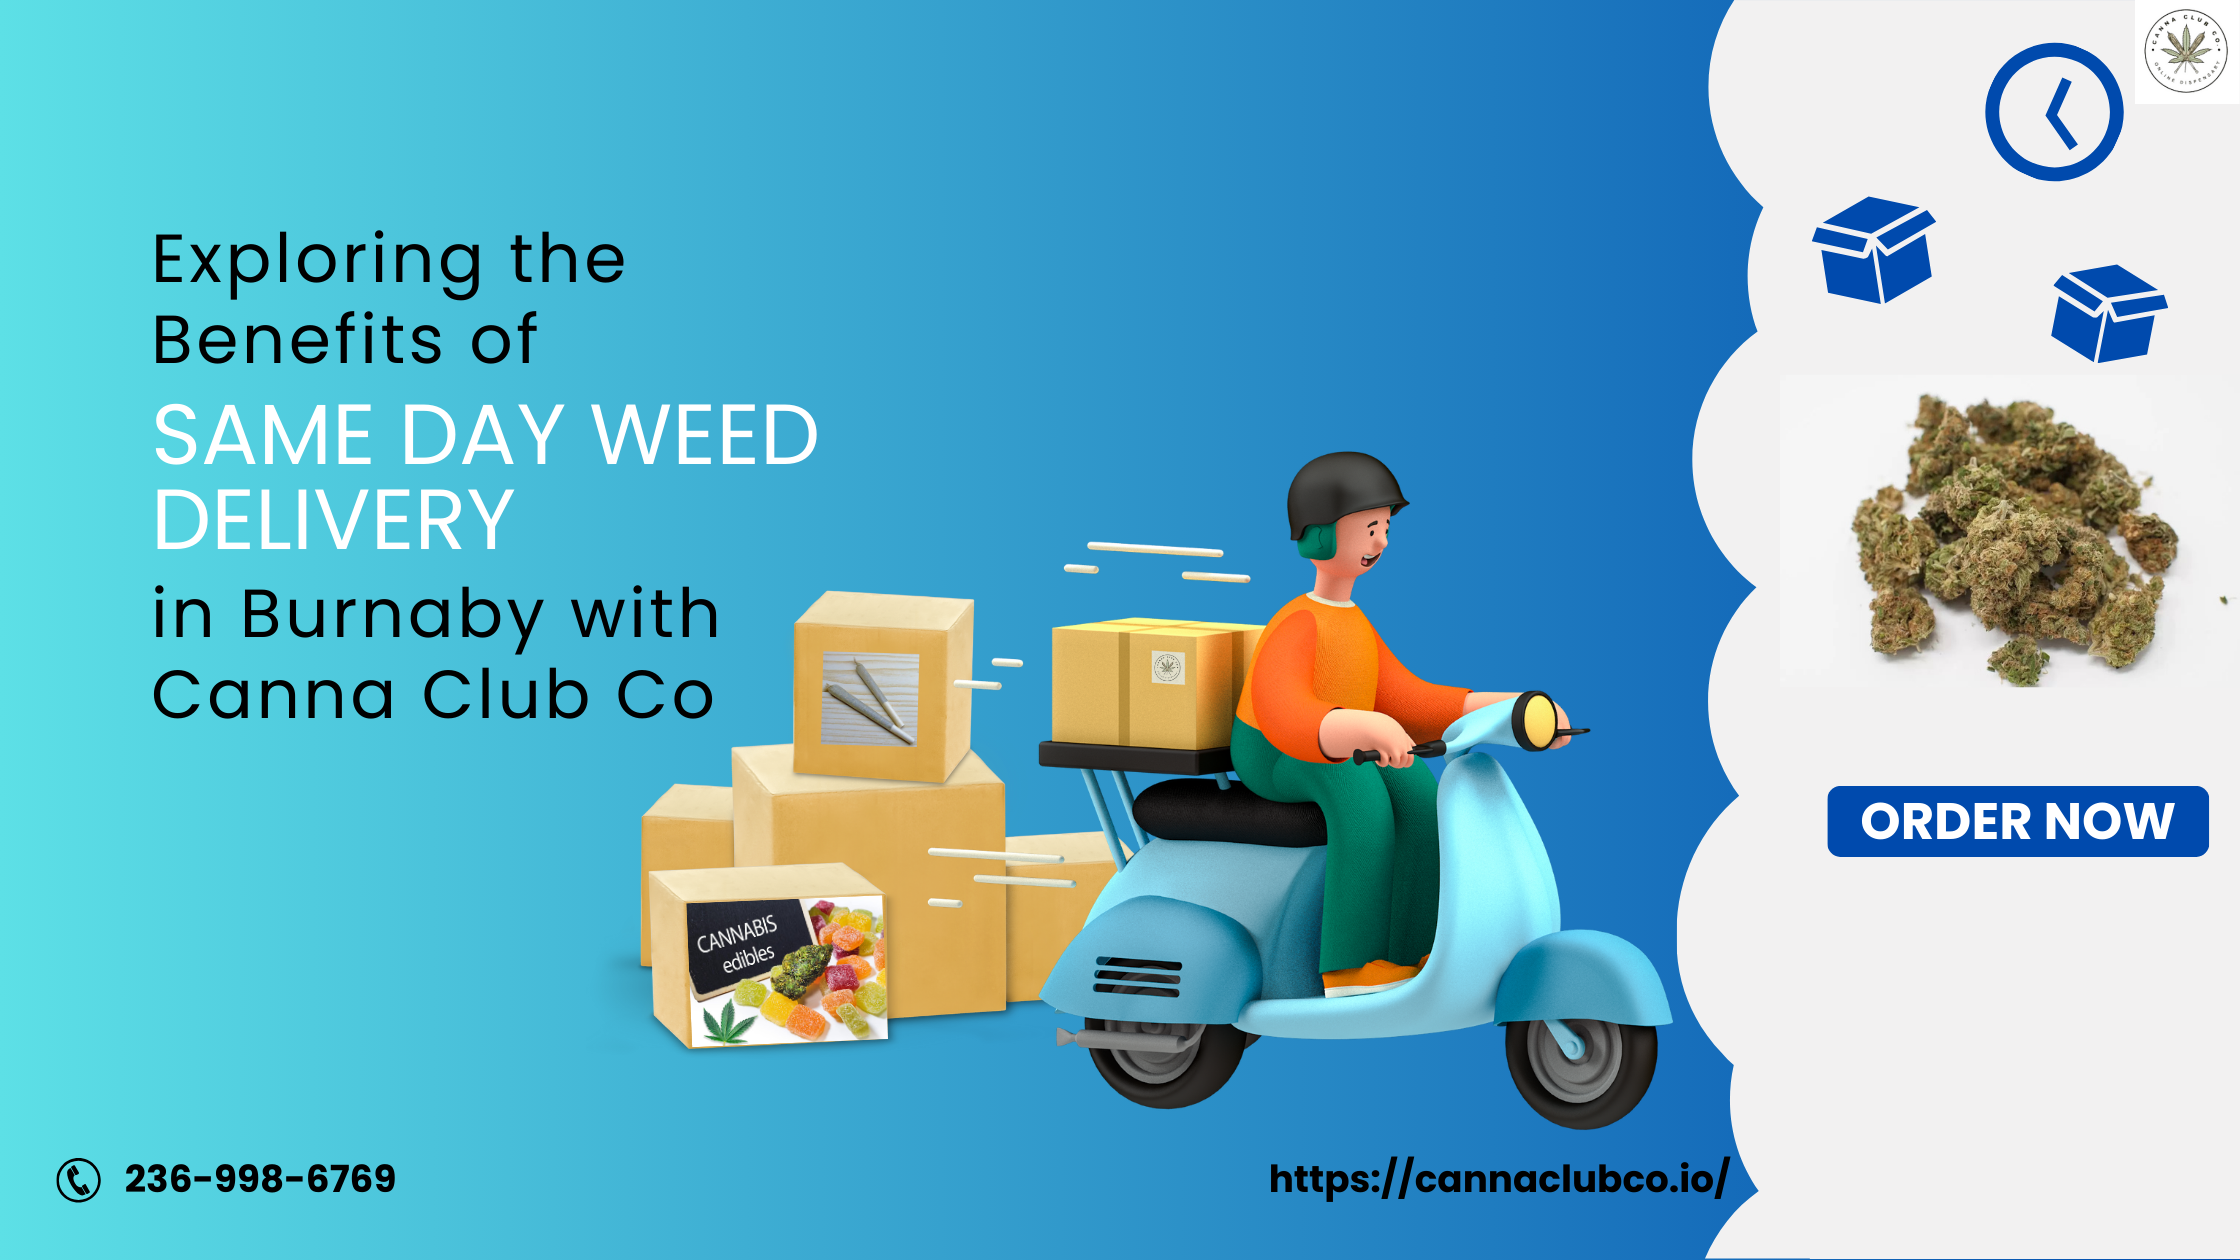 Exploring the Benefits of Same Day Weed Delivery in Burnaby with Canna Club Co